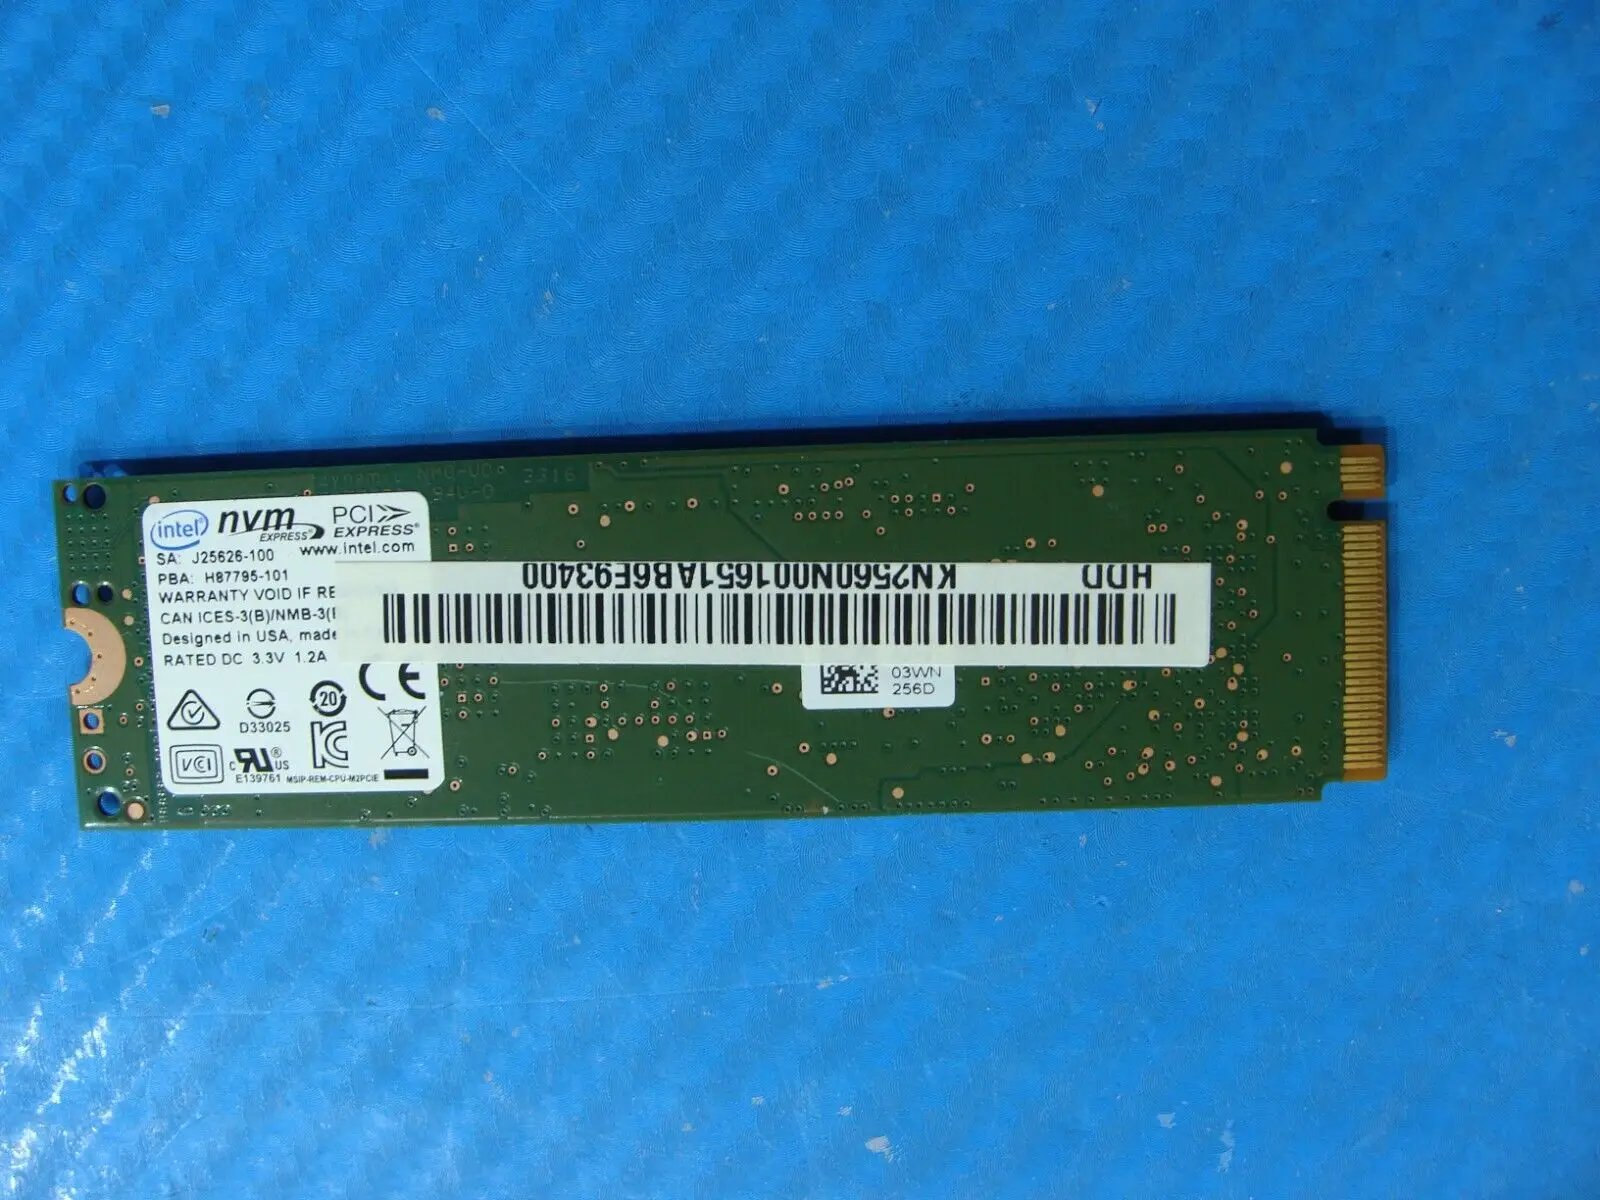 Acer VX5-591G-7061 Intel 256GB NVMe M.2 SSD Solid State Drive SSDPEKKW256G7